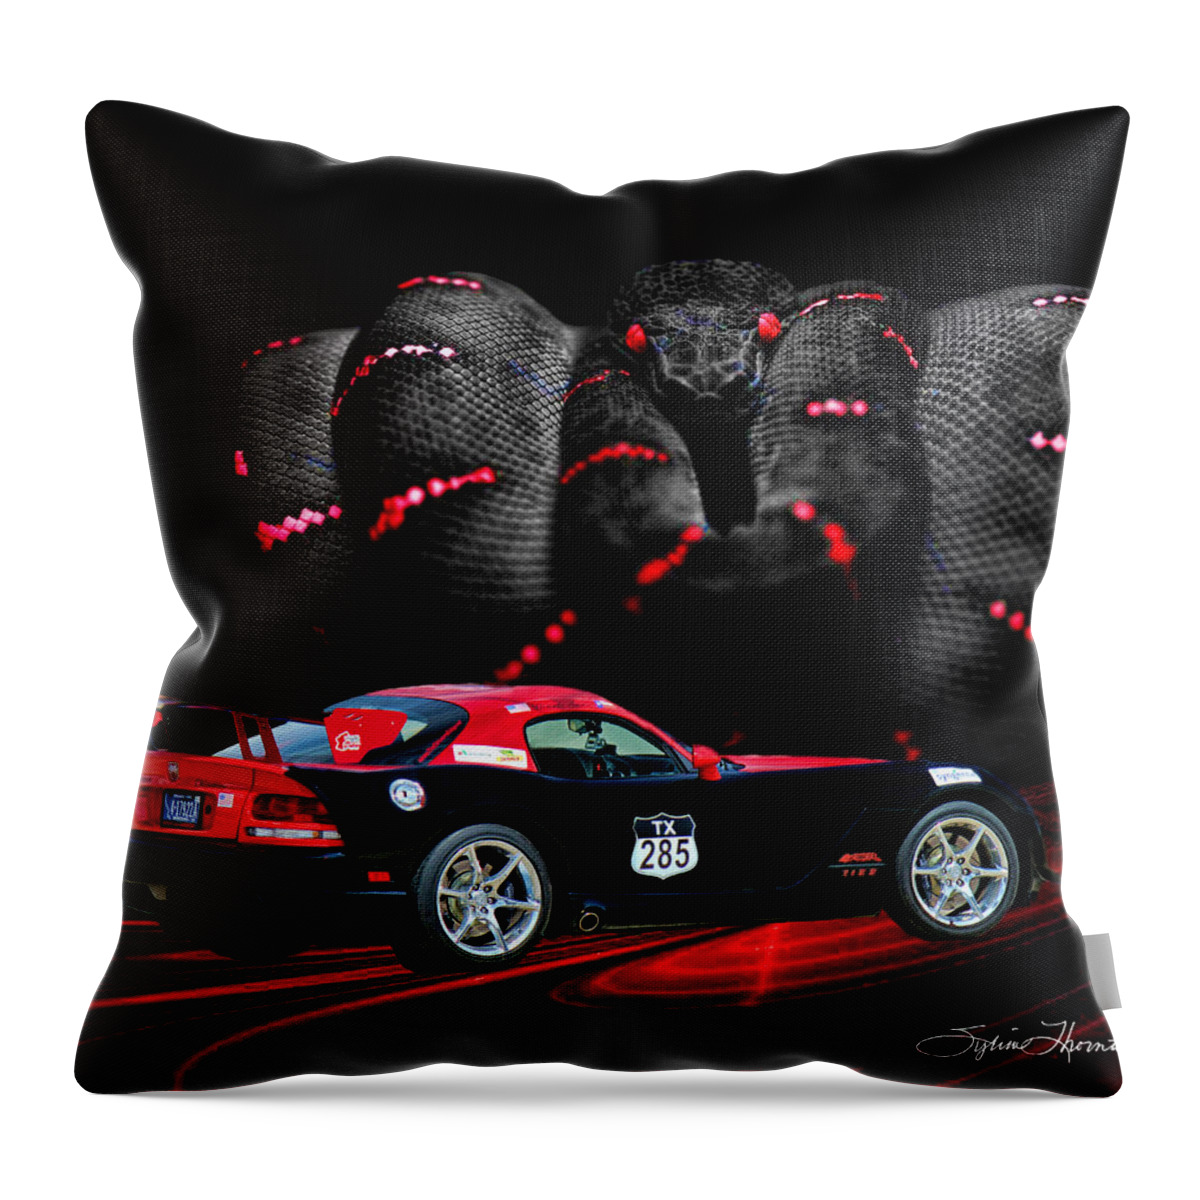 Sports Car Throw Pillow featuring the photograph 2010 Dodge Viper by Sylvia Thornton